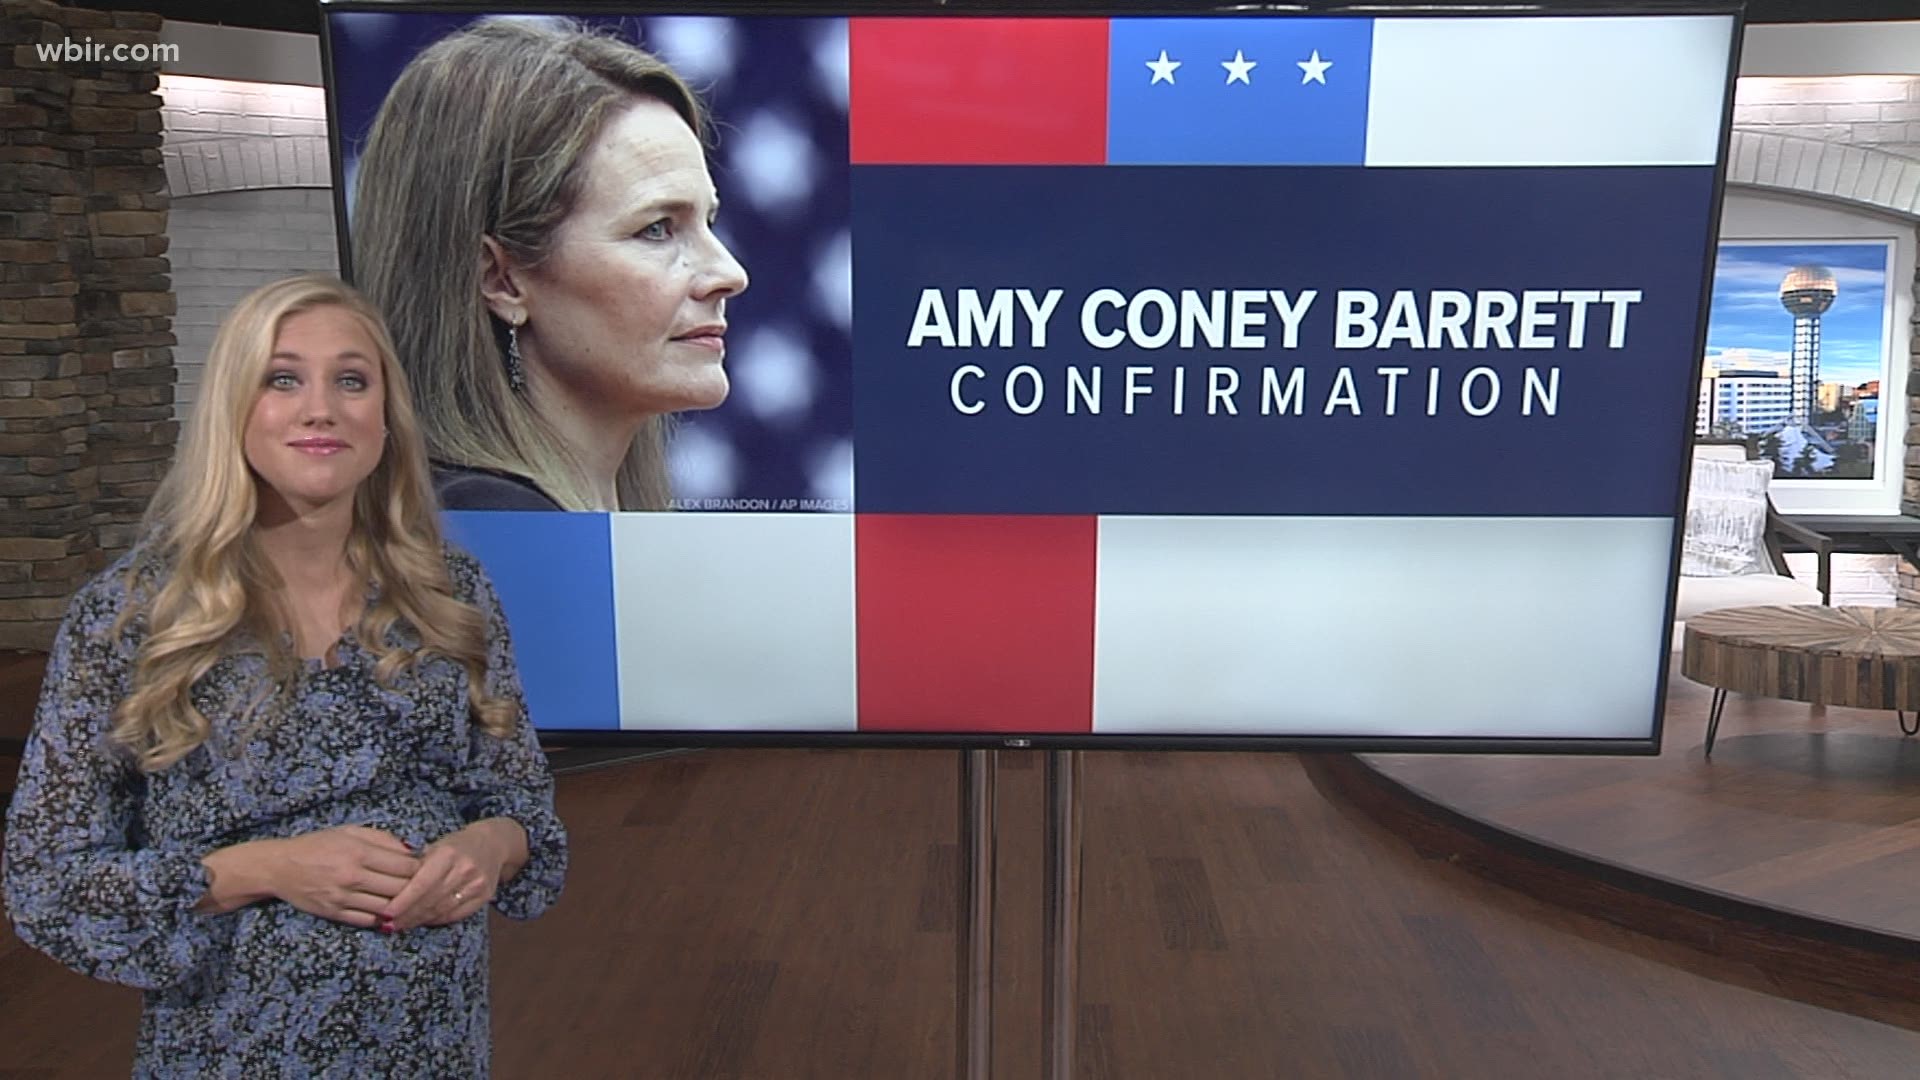 Judge Amy Coney Barrett is now the newest supreme court justice after a historic move in Washington.